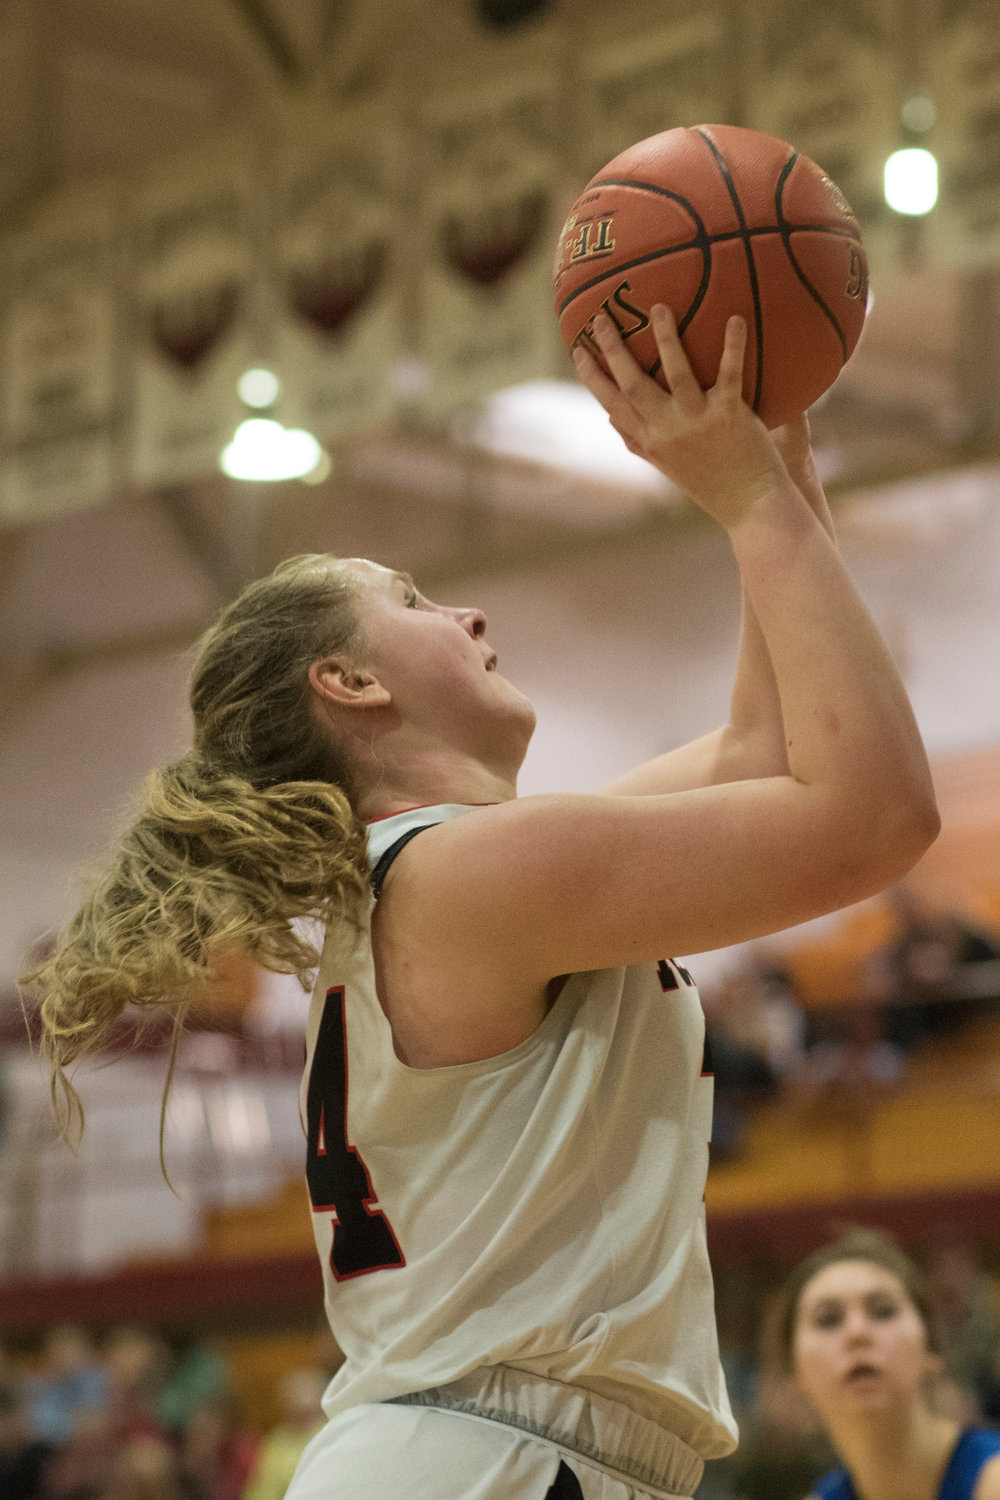 Toledo center Stacie Spahr takes a shot in the paint against Toutle Lake on Monday, Feb. 17, 2020. (Eric Trent / etrent@chronline.com)